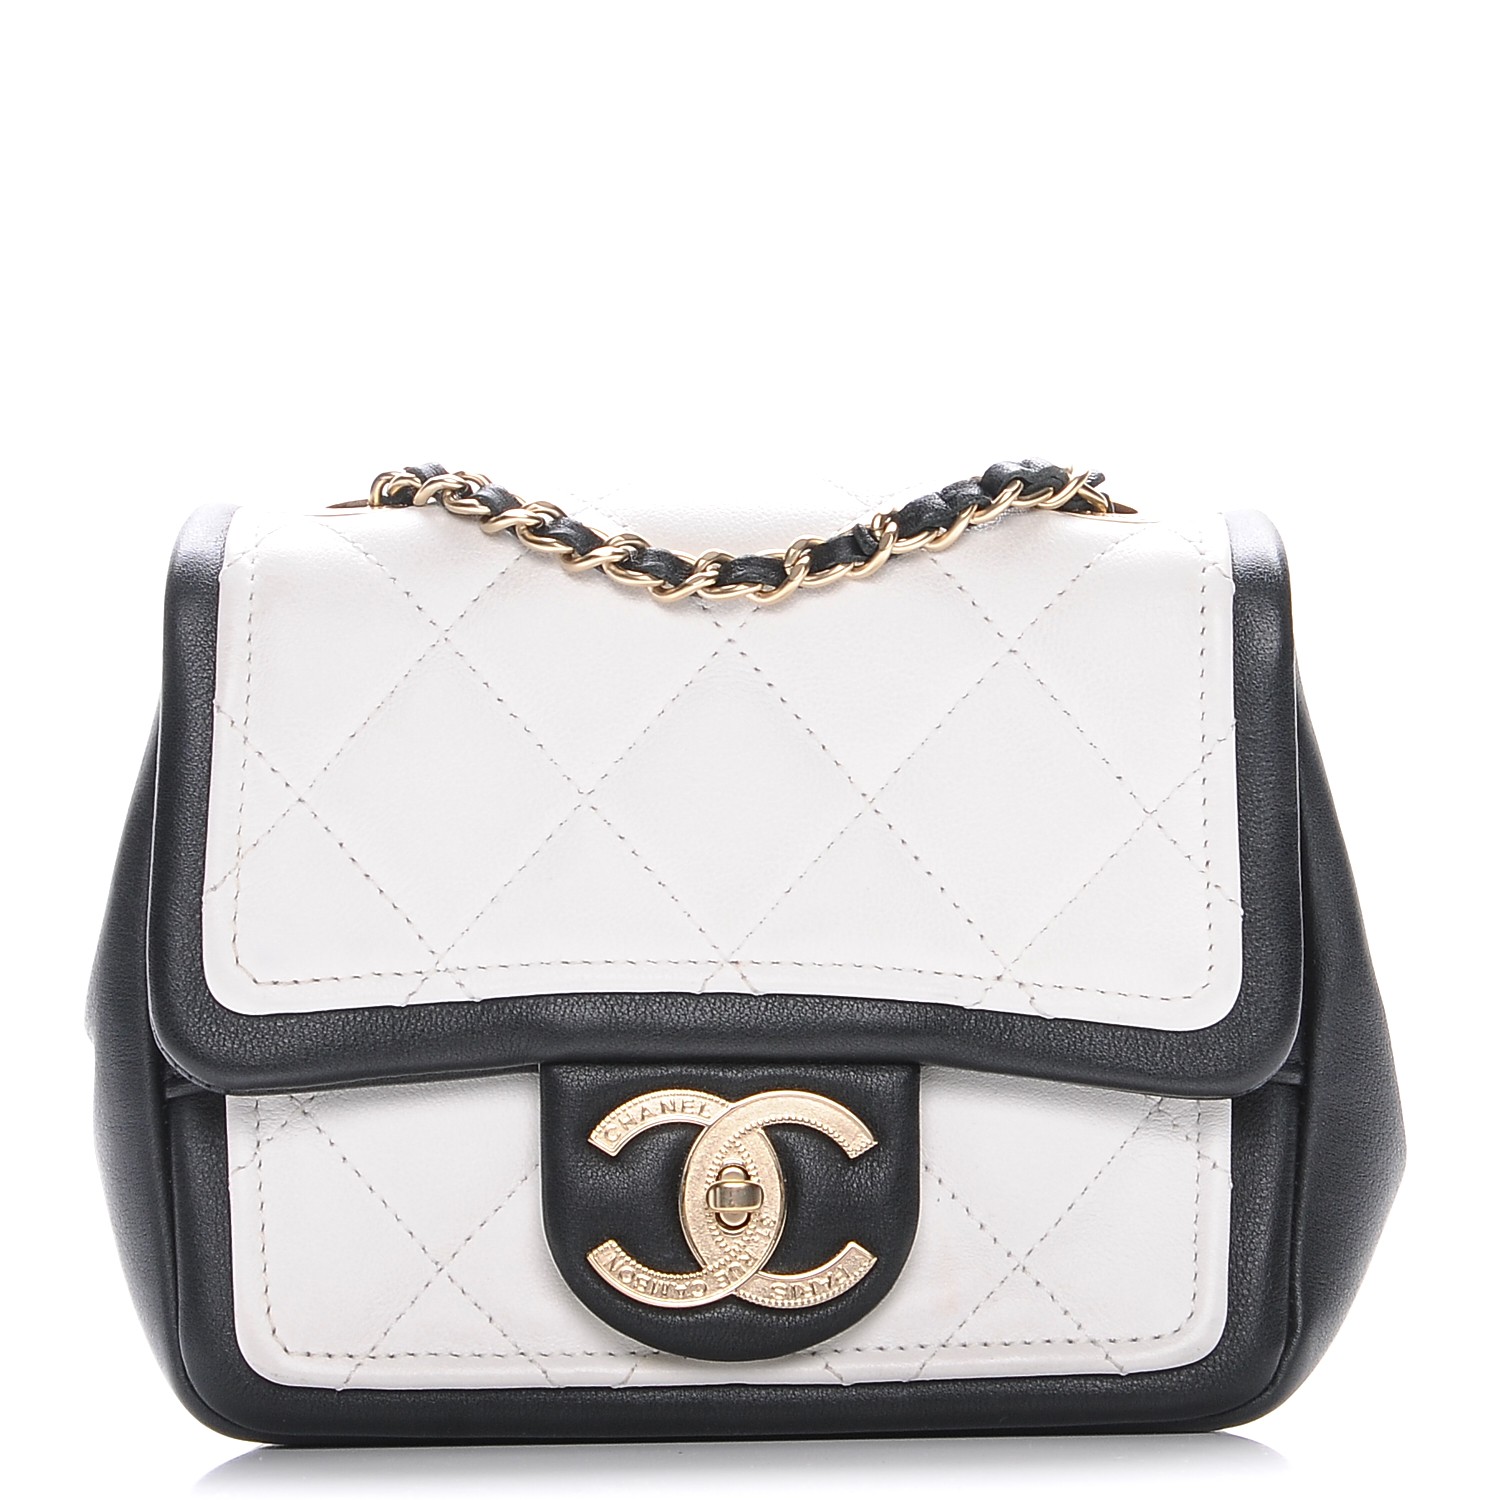 CHANEL Lambskin Quilted Graphic Mini Flap Bag White Black 220517